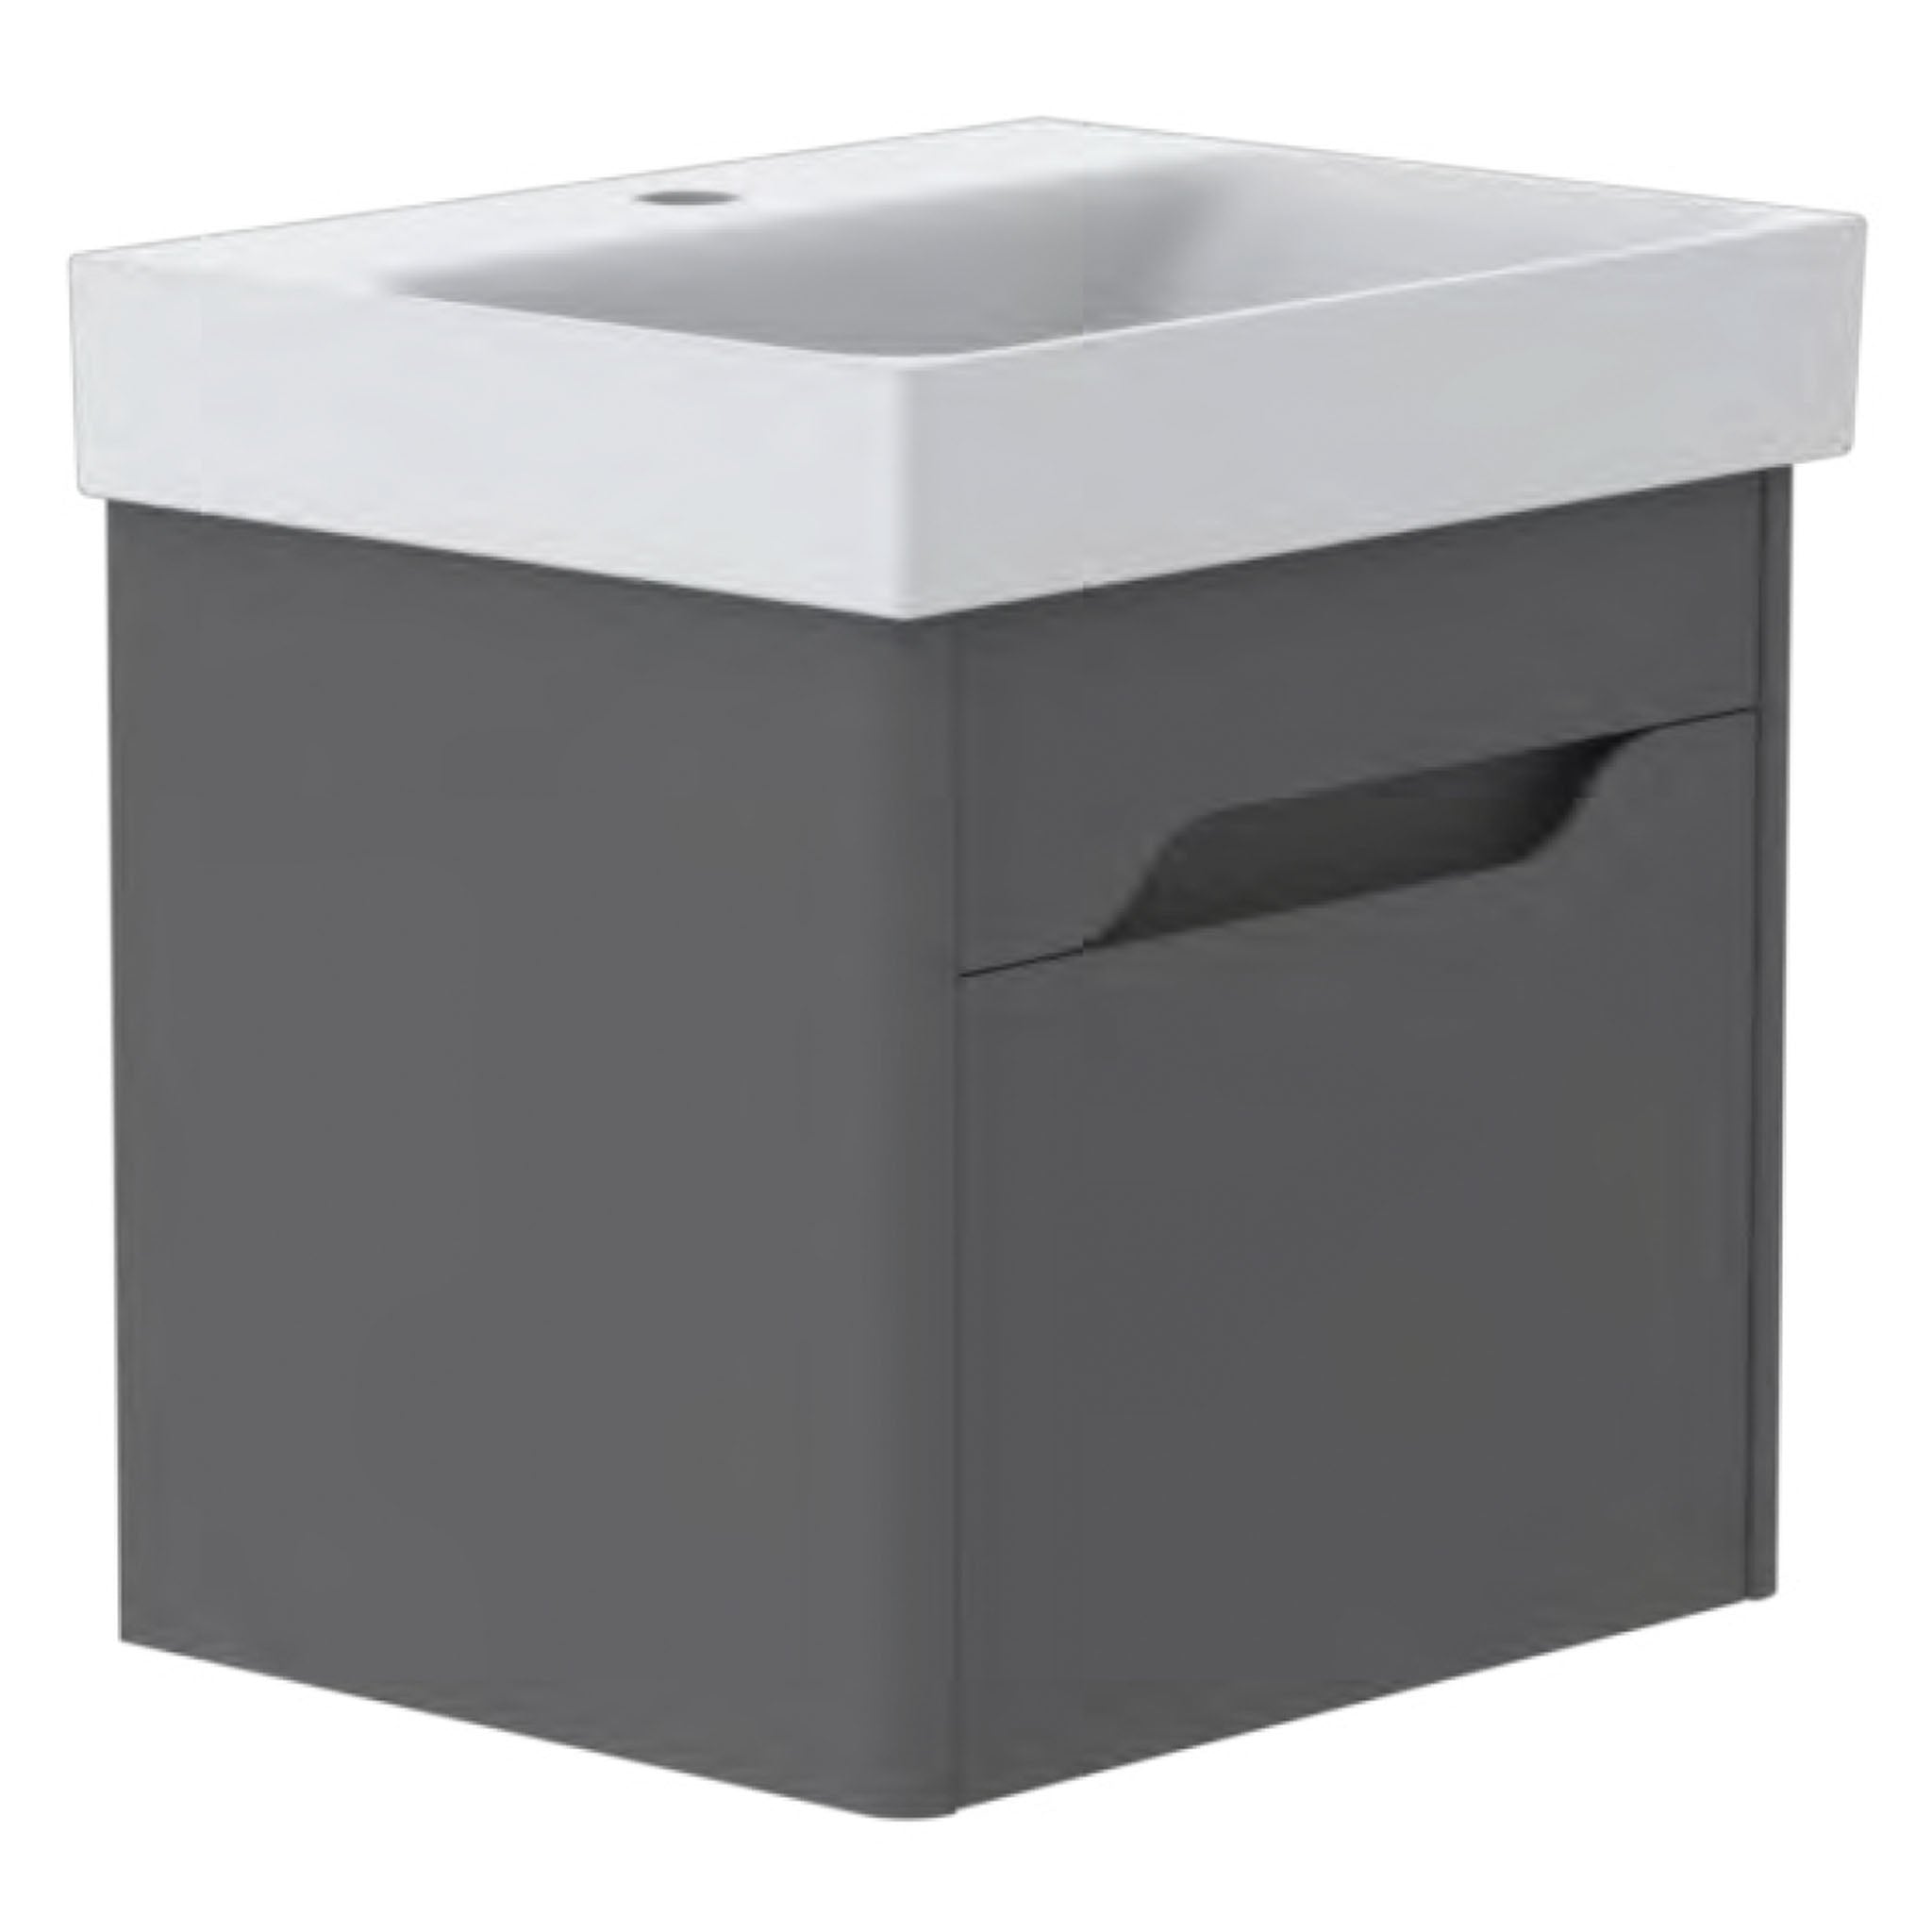 GSI Nubes Lacquer 60 x 40 1 Drawer Vanity Unit